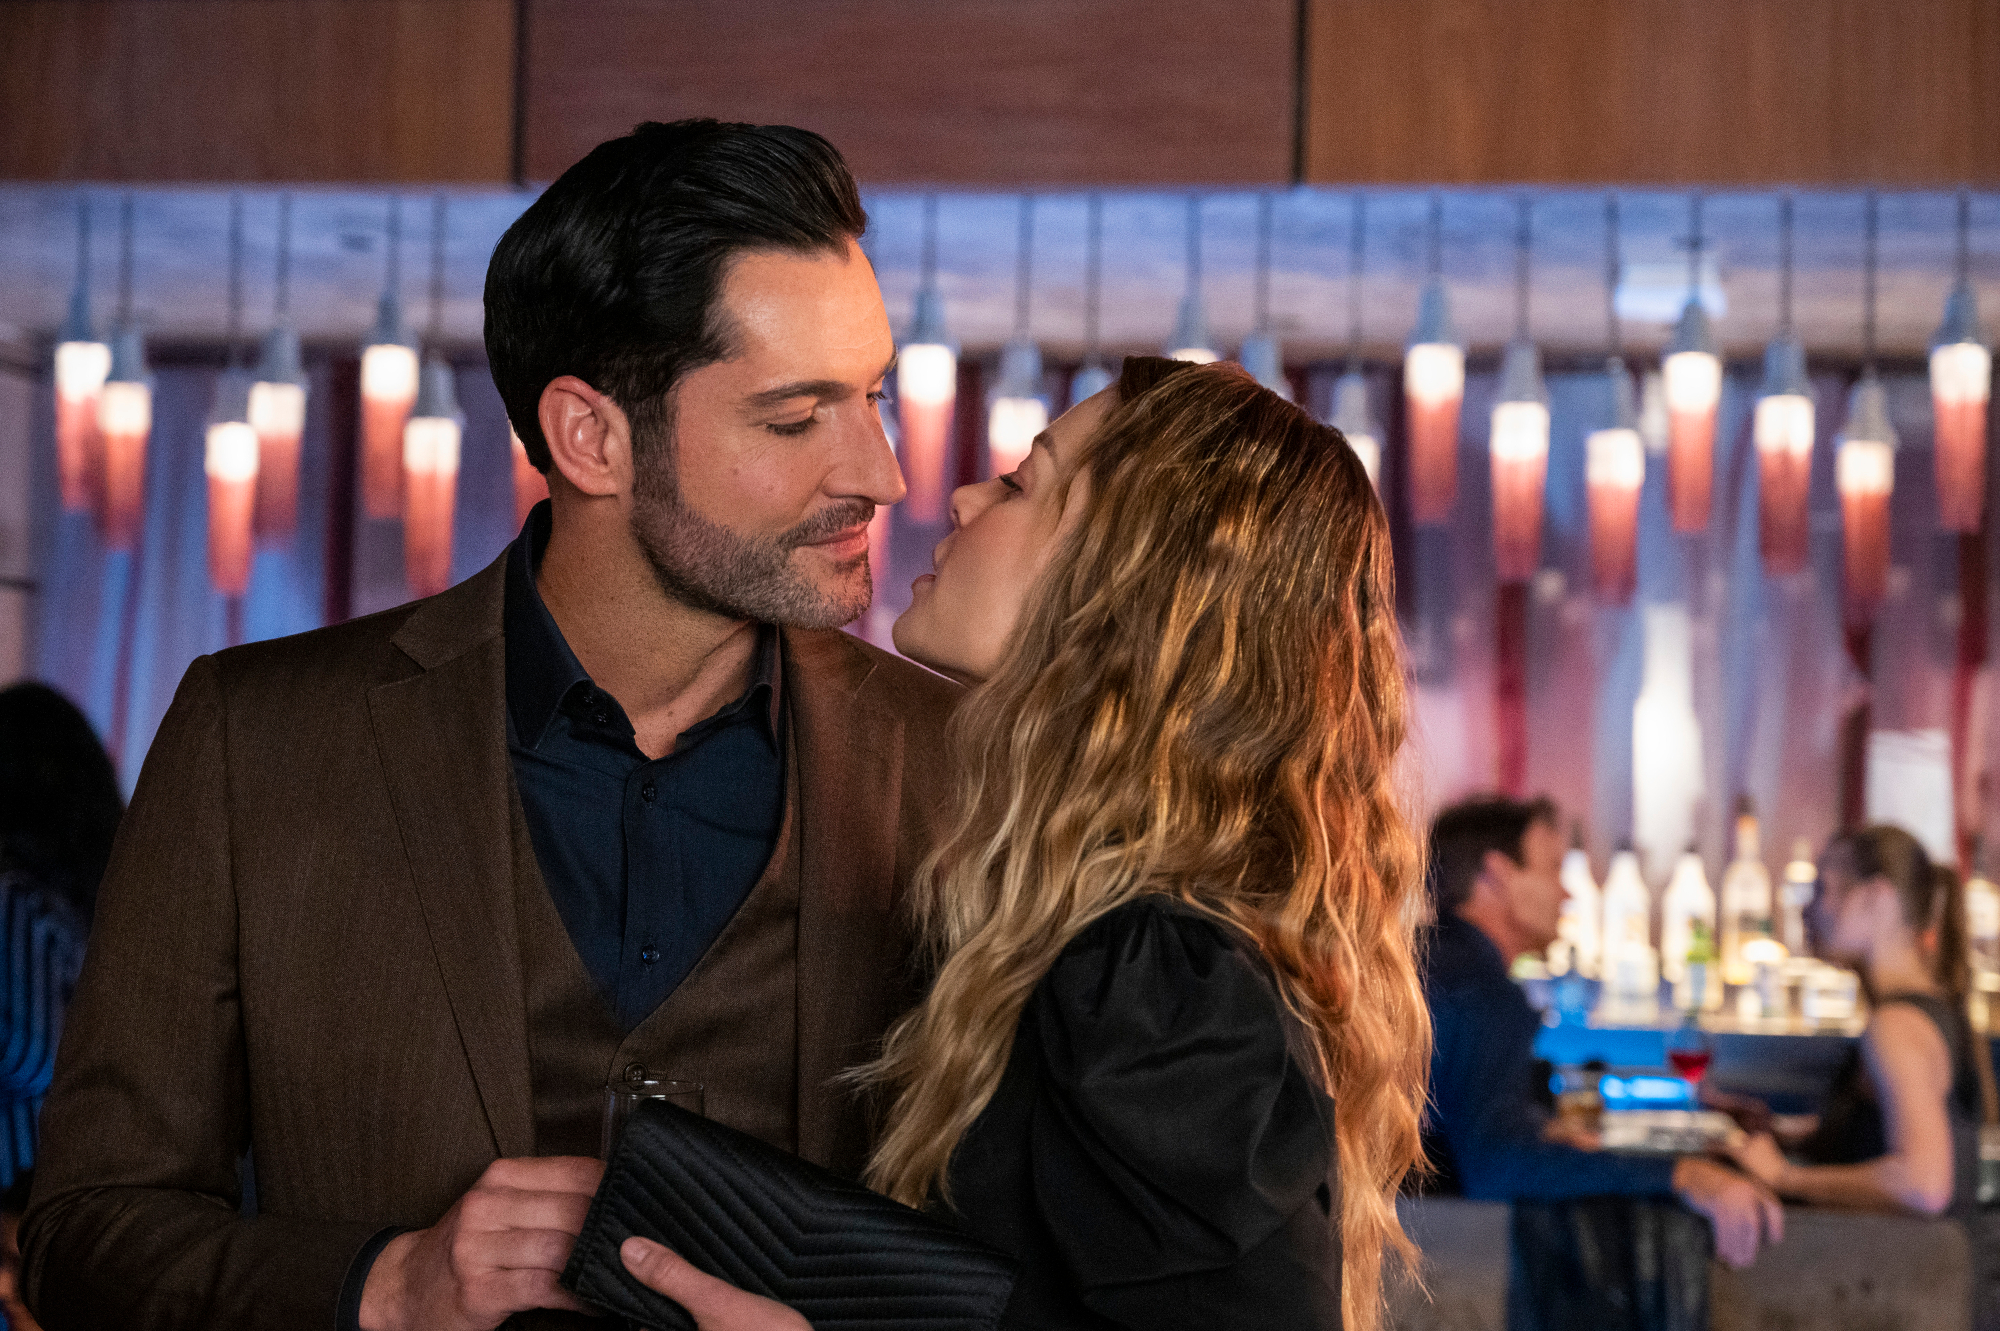 Lucifer': The Best and Worst Episodes of Season 5, According to IMDb